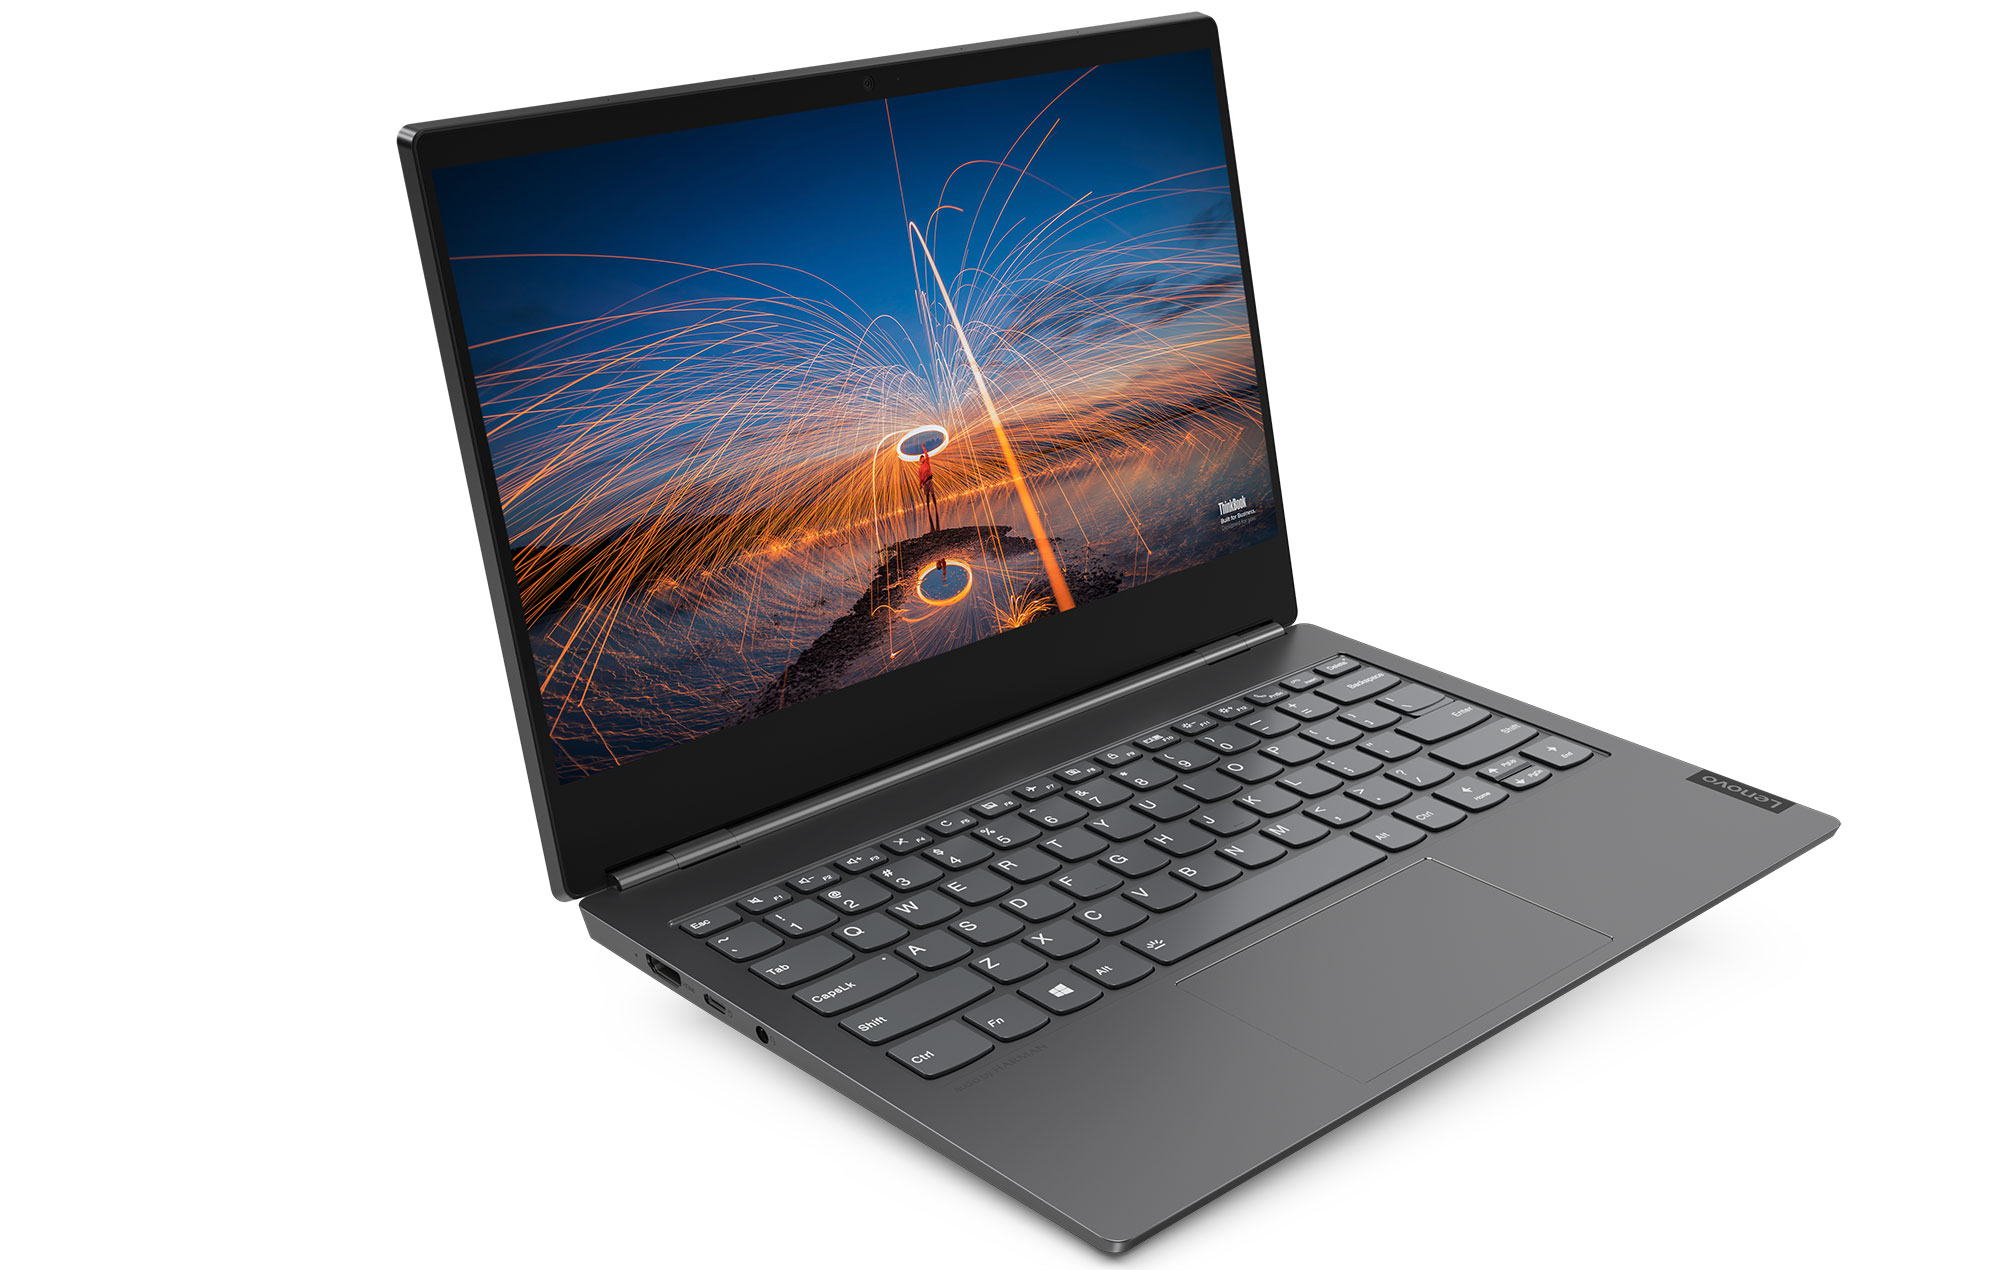 Lenovo ThinkBook Plus 13 gets a secondary e-Ink display and pen support